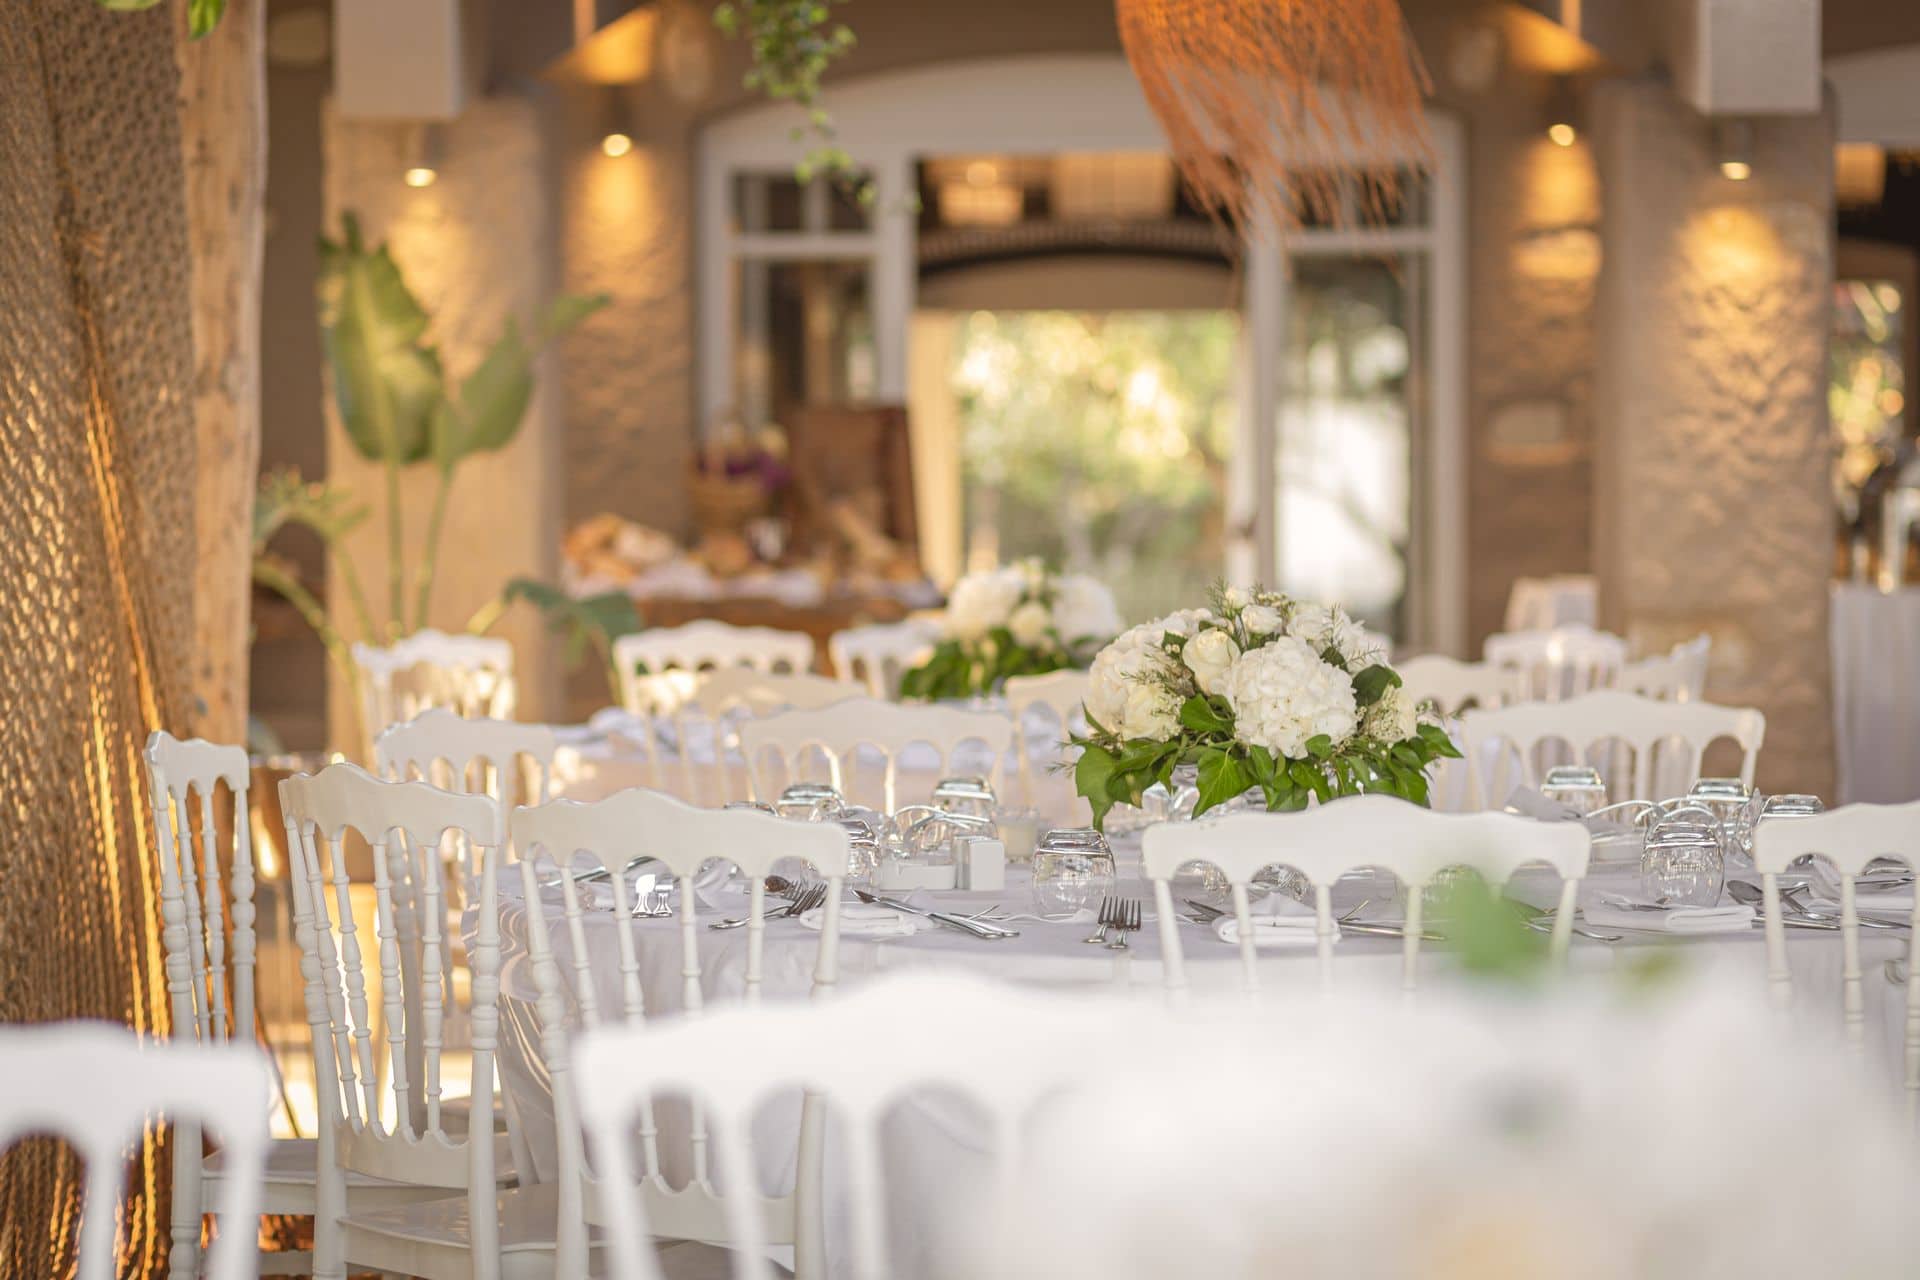 An elegant setting for samos weddings and other social events at Doryssa Hotels